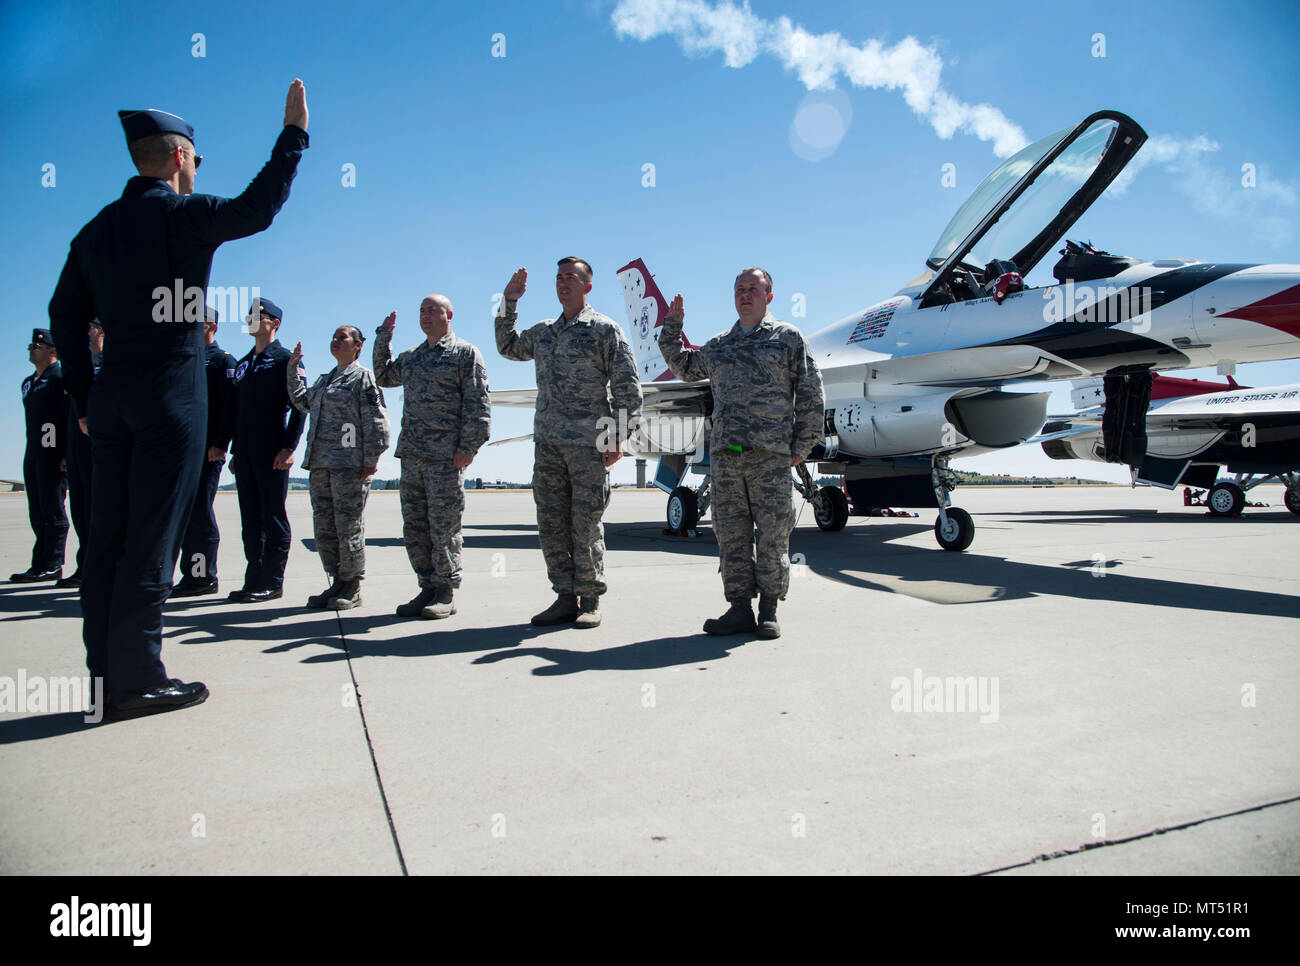 Lt. Col. Jason Heard, U.S. Air Force Aerial Demonstration Squadron “Thunderbirds” commander/leader, reenlists four members of Team Fairchild during SkyFest 2017 Air Show and Open House at Fairchild Air Force Base, Washington, July 28, 2017. SkyFest hosted more than 15 types of aircraft and static displays and more than 10 flying performers. (U.S. Air Force photo/Senior Airman Janelle Patiño) Stock Photo